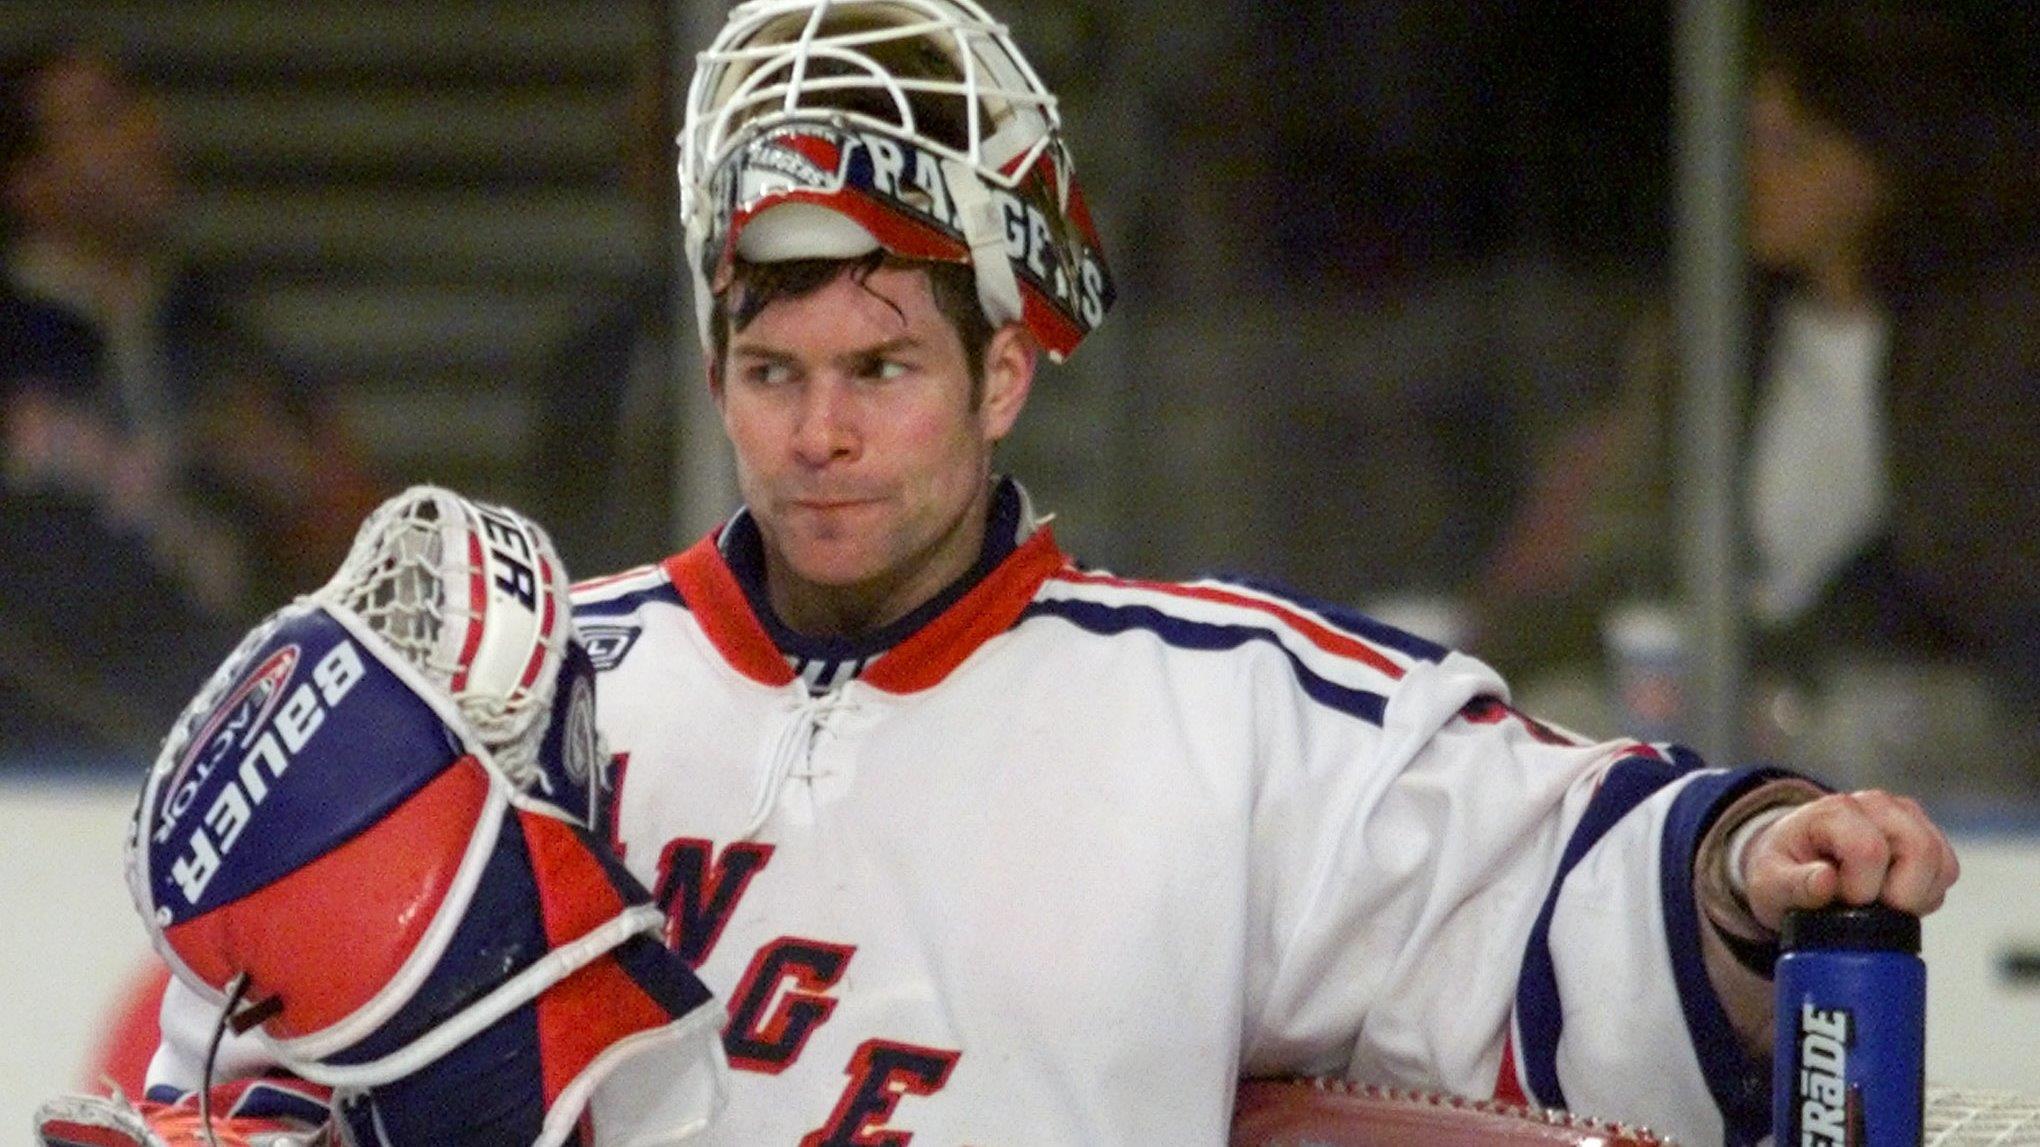 Former New York Rangers goalie Mike Richter on Jordan Spieth’s collapse at the Masters, his charity for pediatric cancer and Hillary Clinton’s subway swipe.